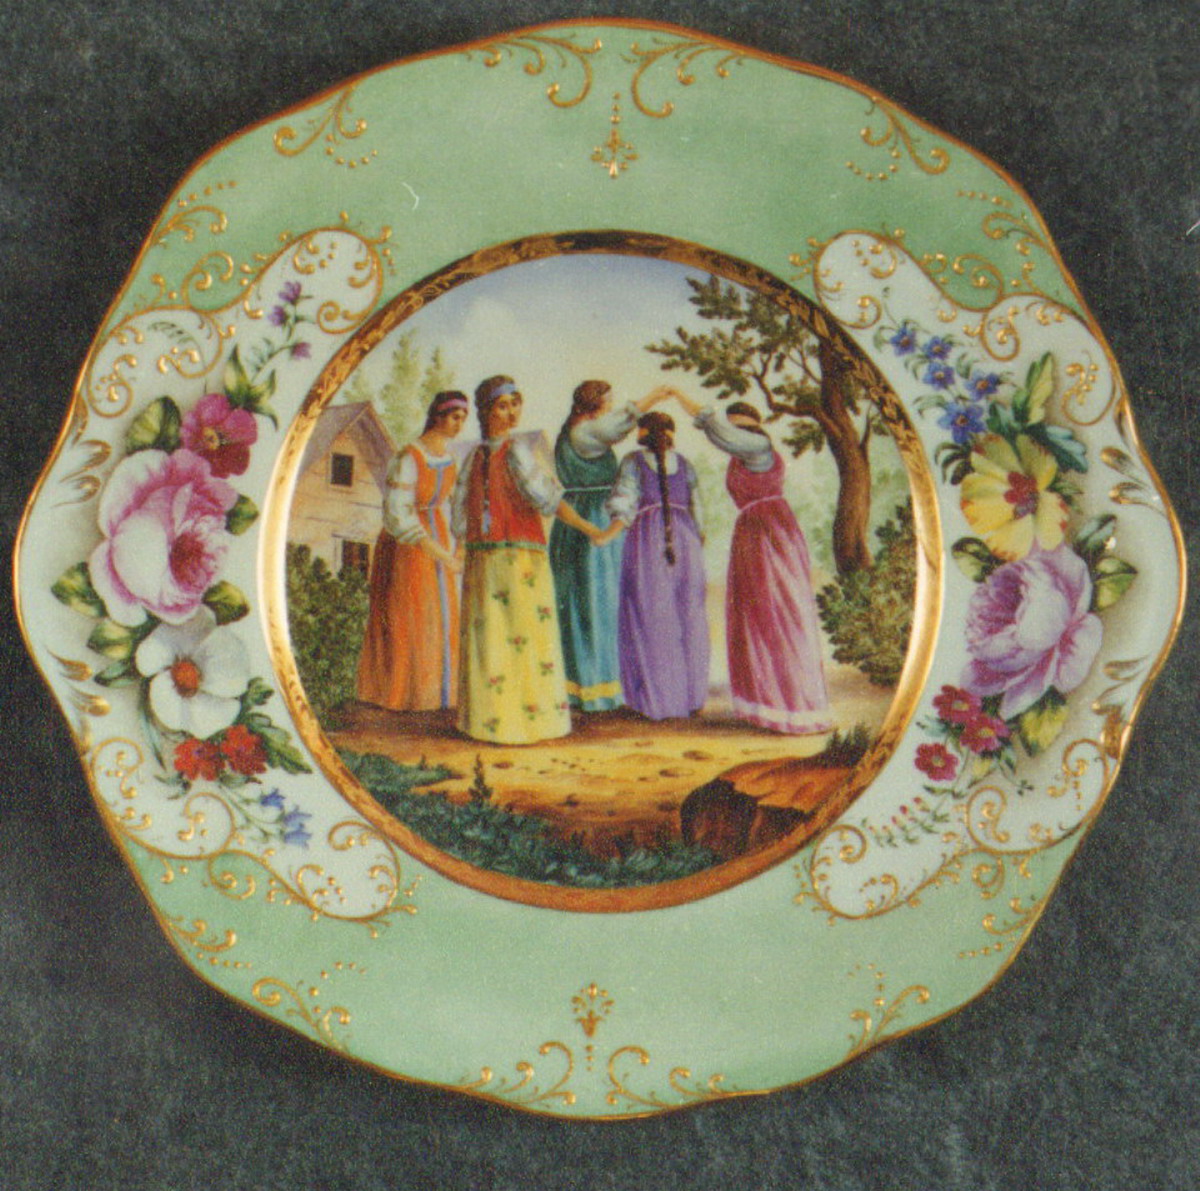 Wall Plate. Young Ladies Playing. Over Glasour Painting on Porcelain. D 27 cm